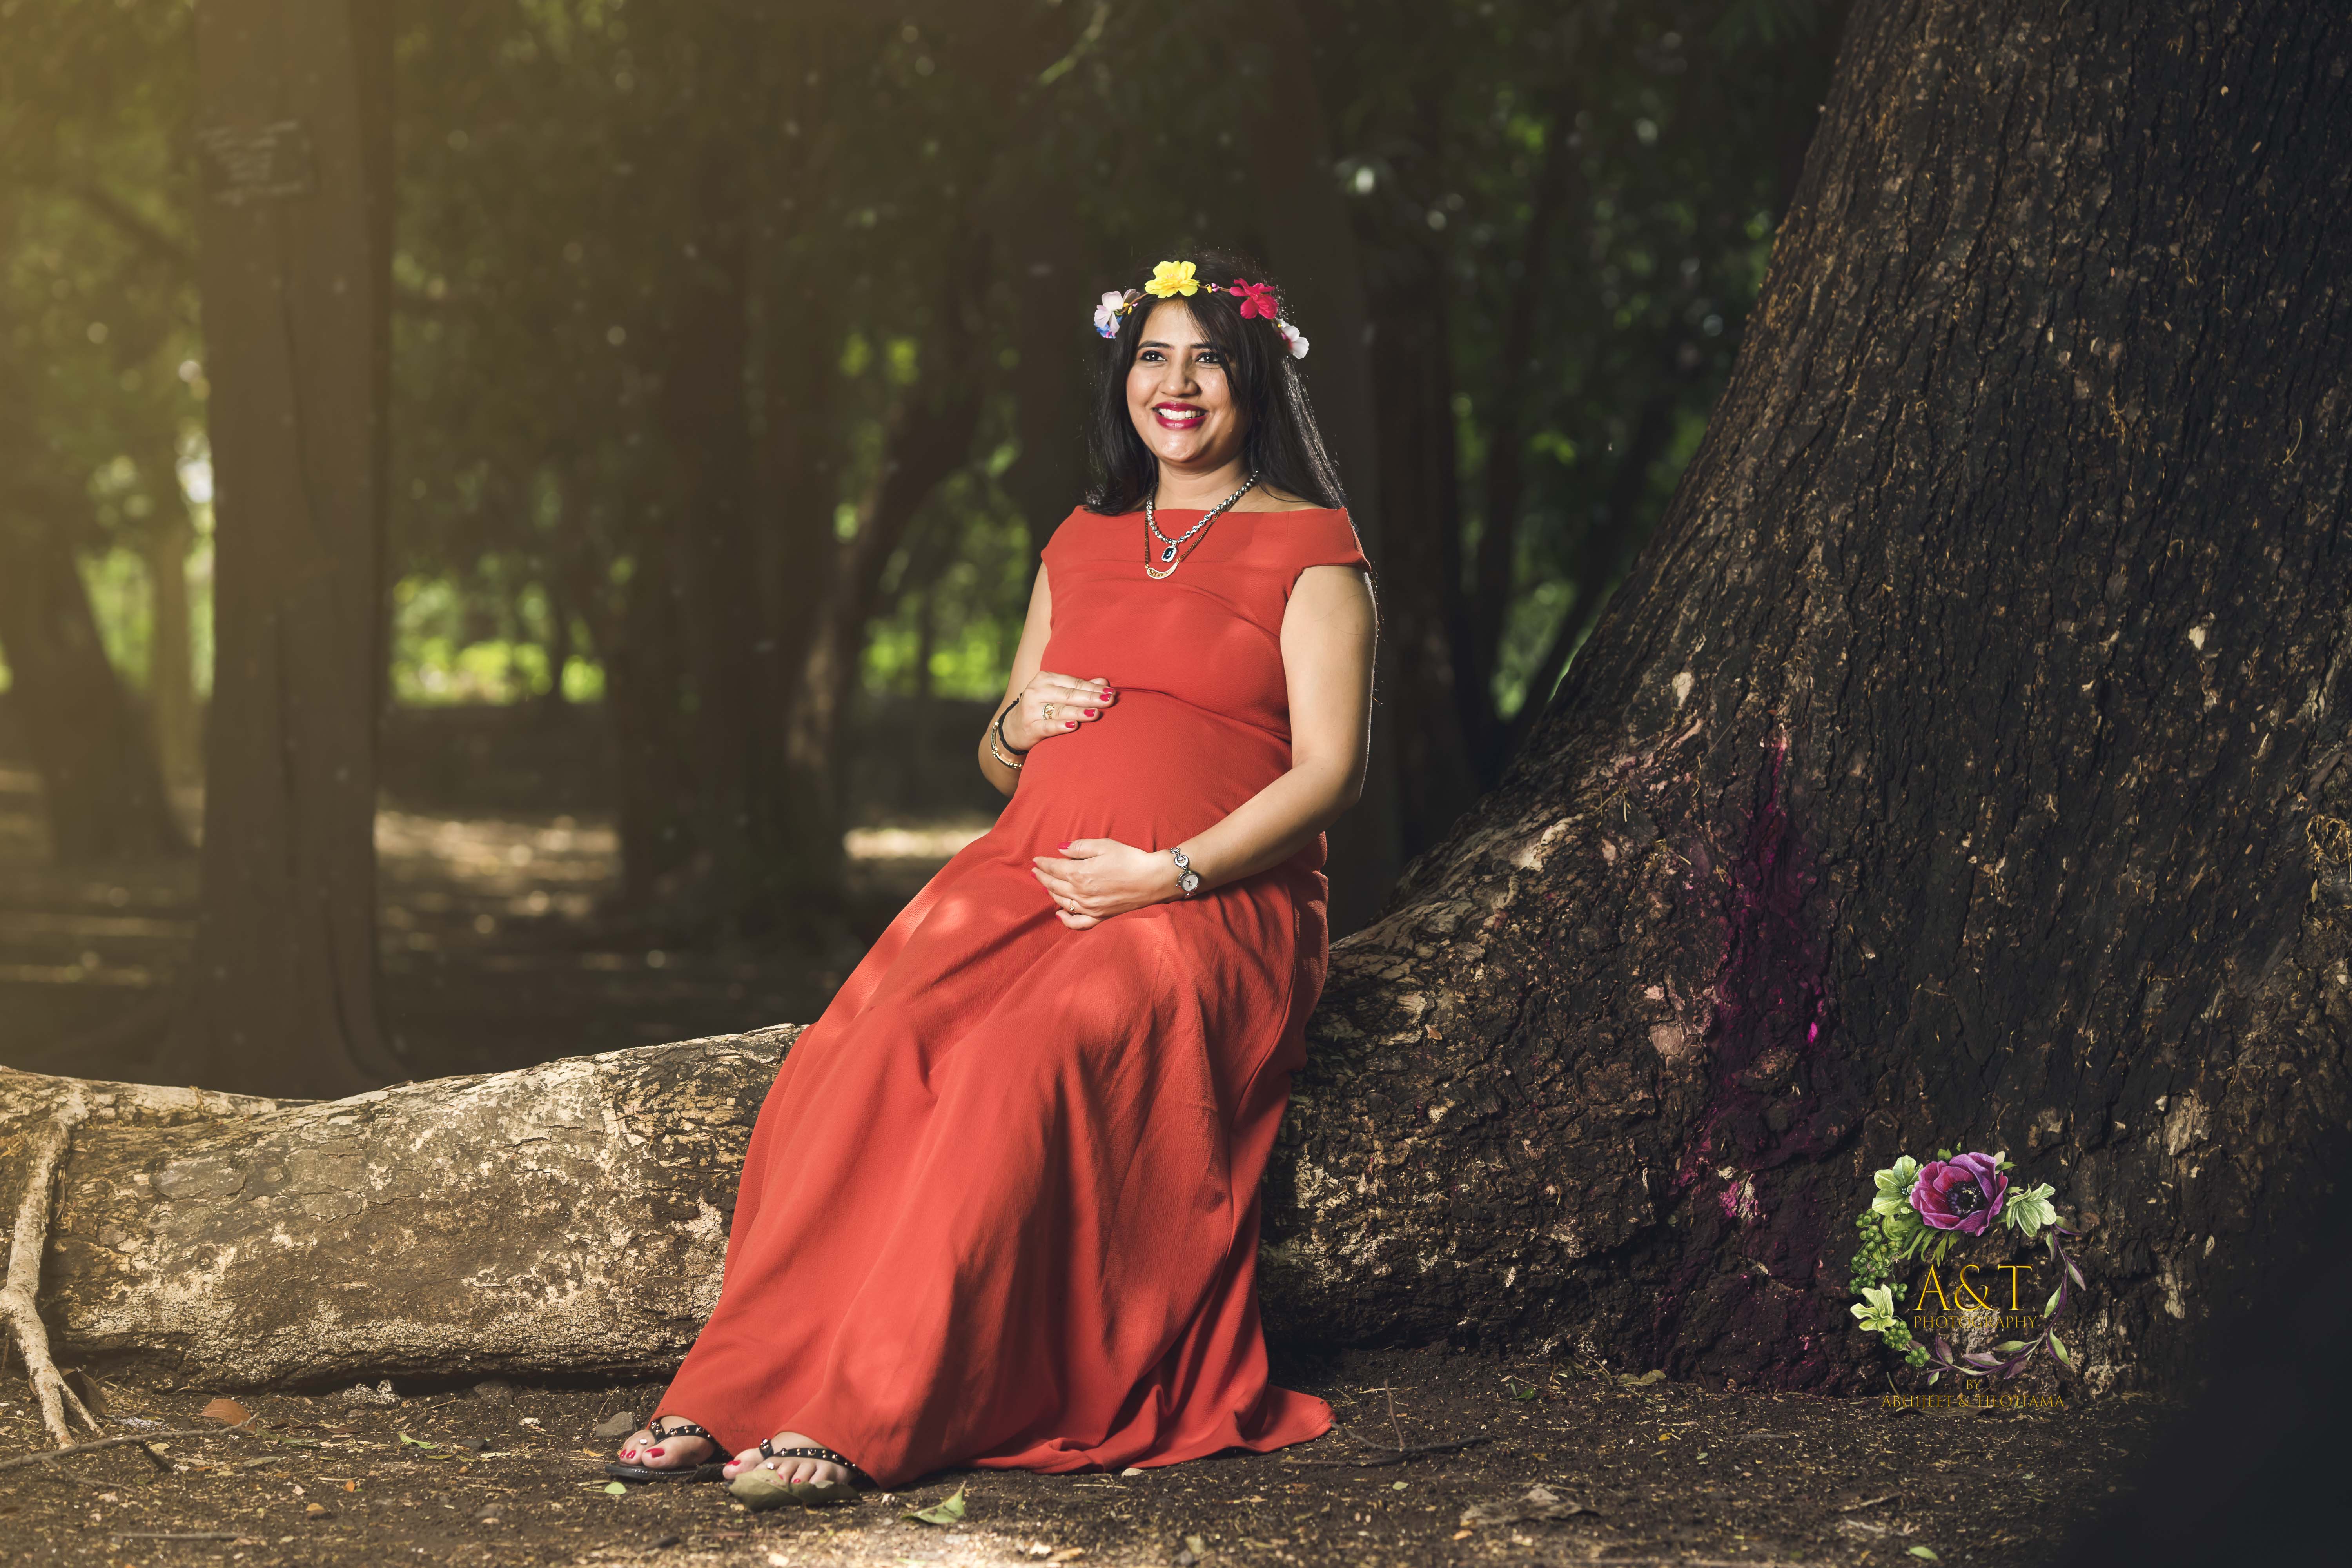 Veena's Maternity Photoshoot by best photographer in Pune